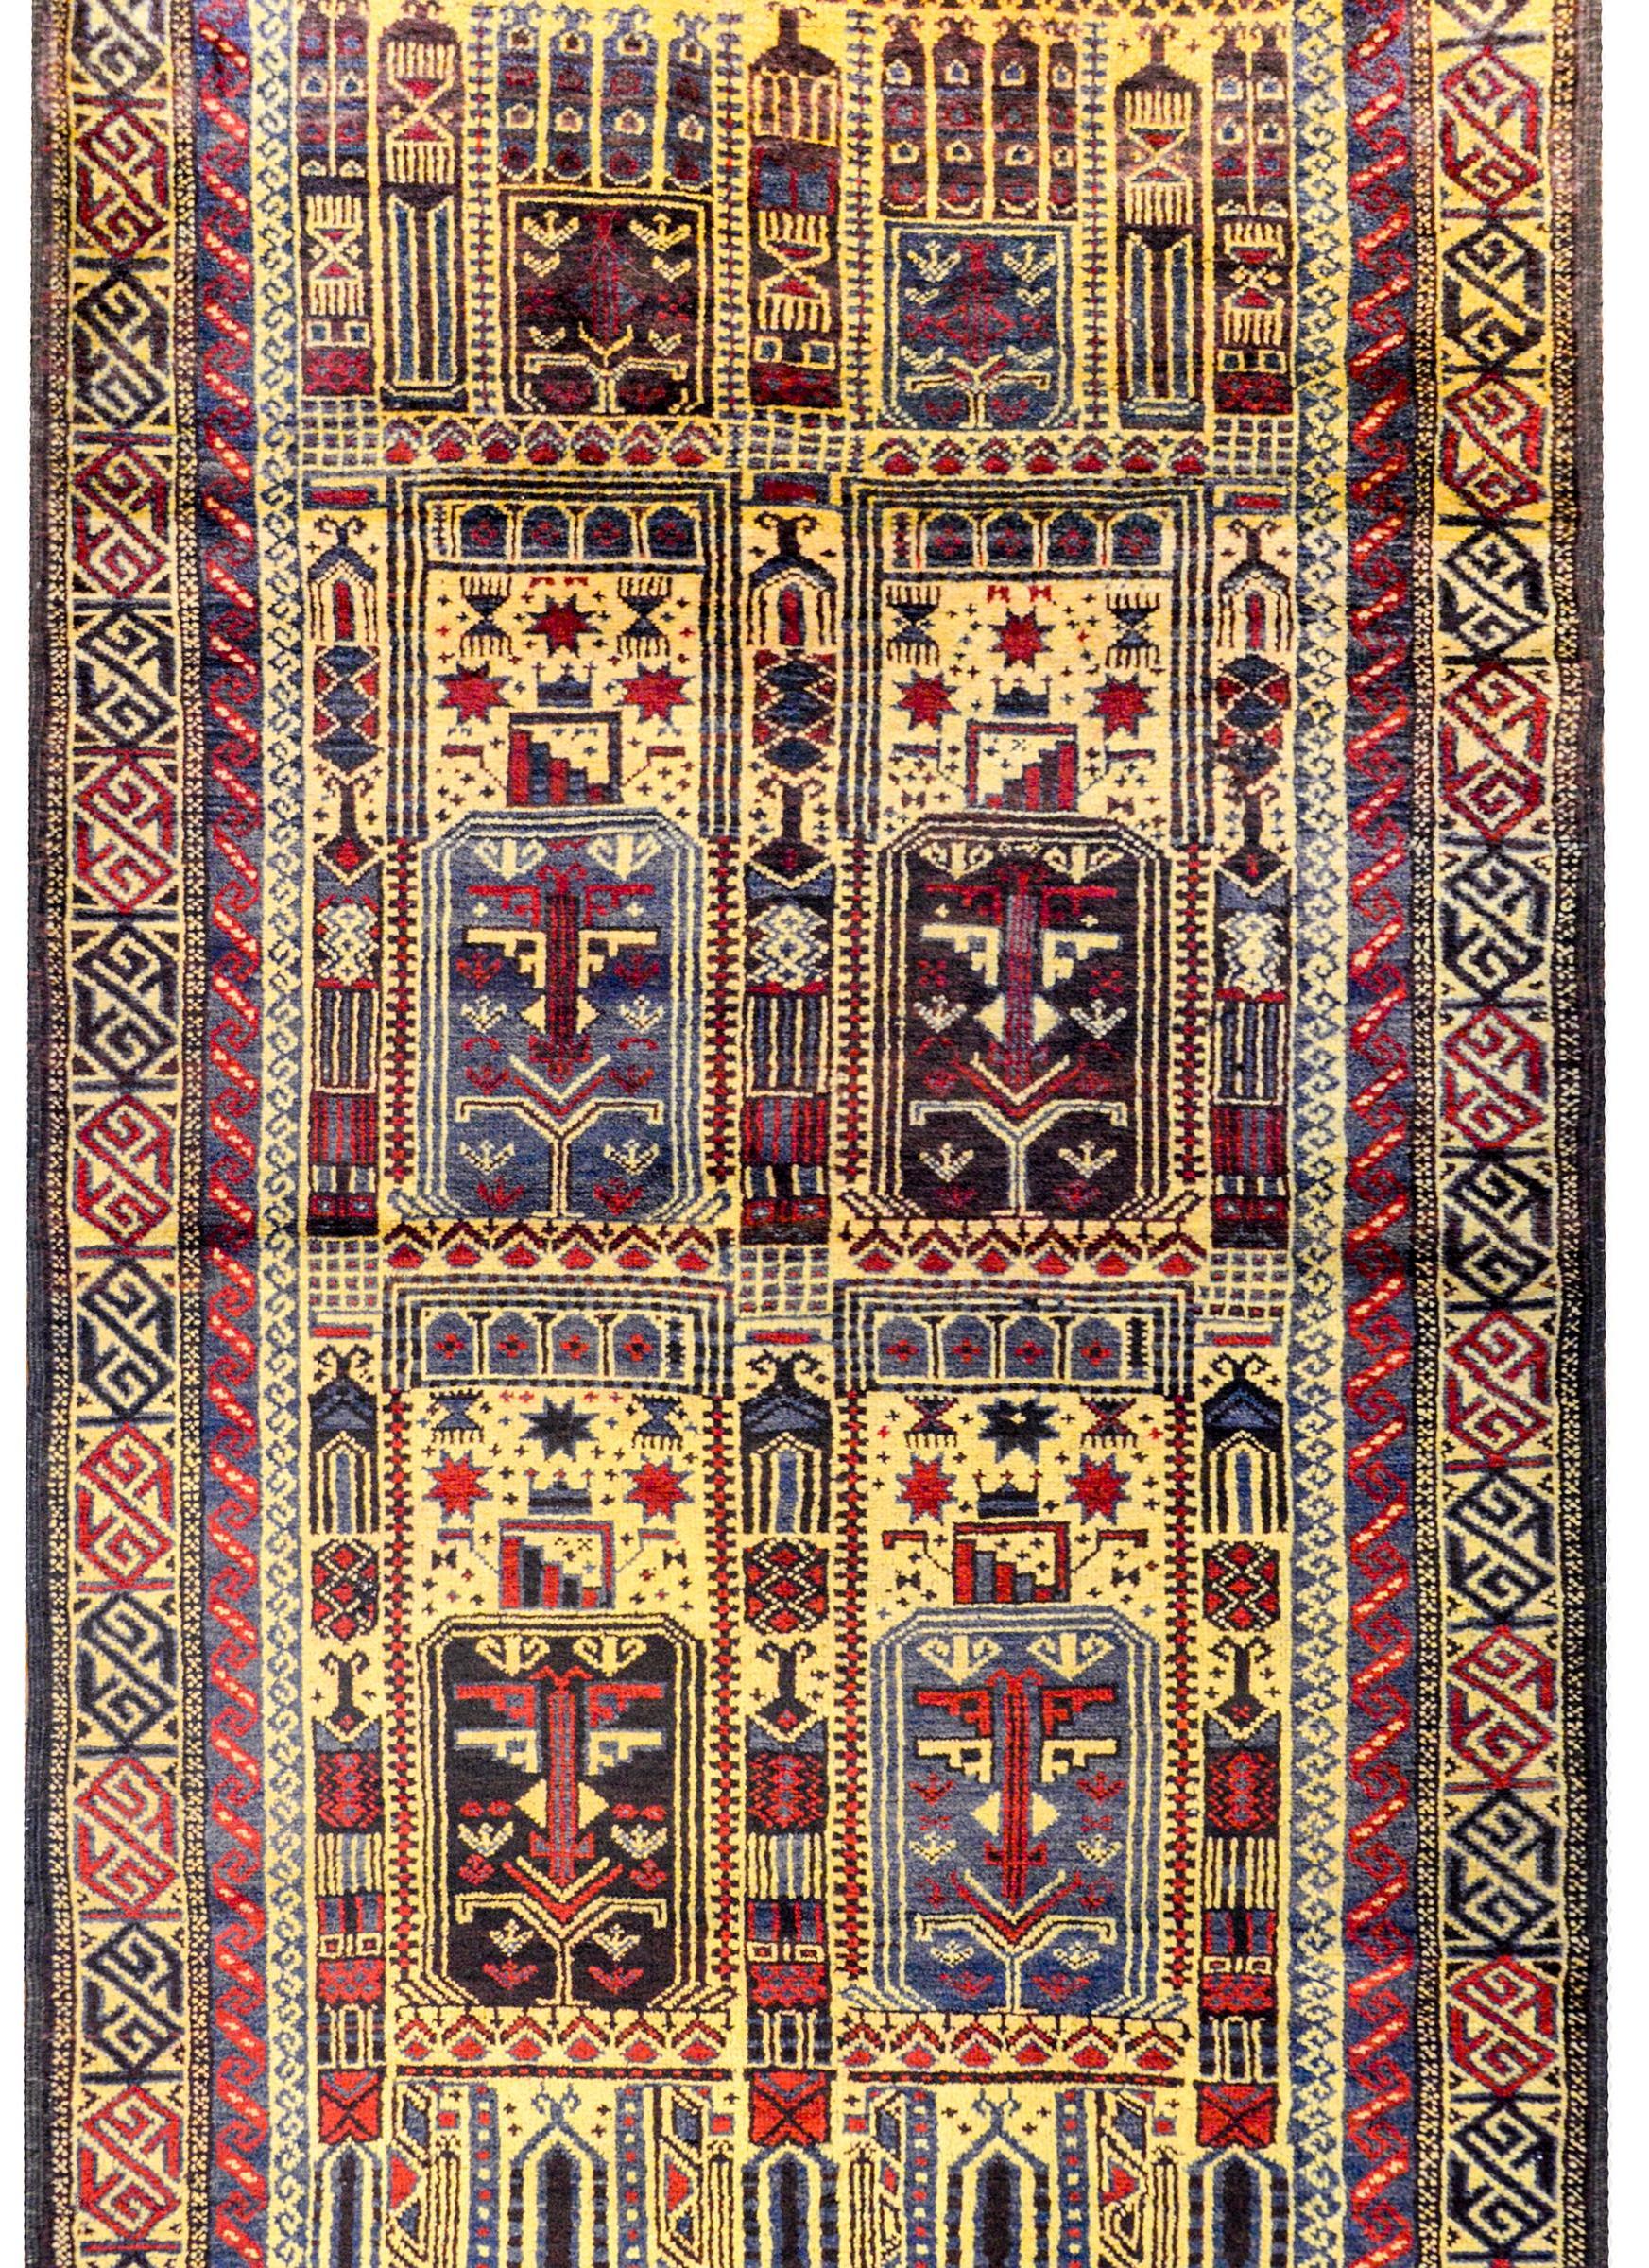 A wonderful vintage Afghani Baluchi prayer rug with an all-over stylized floral pattern woven in crimson, indigo, brown, and gold vegetable dyed wool surrounded by two geometric patterned stripes woven in similar colors.